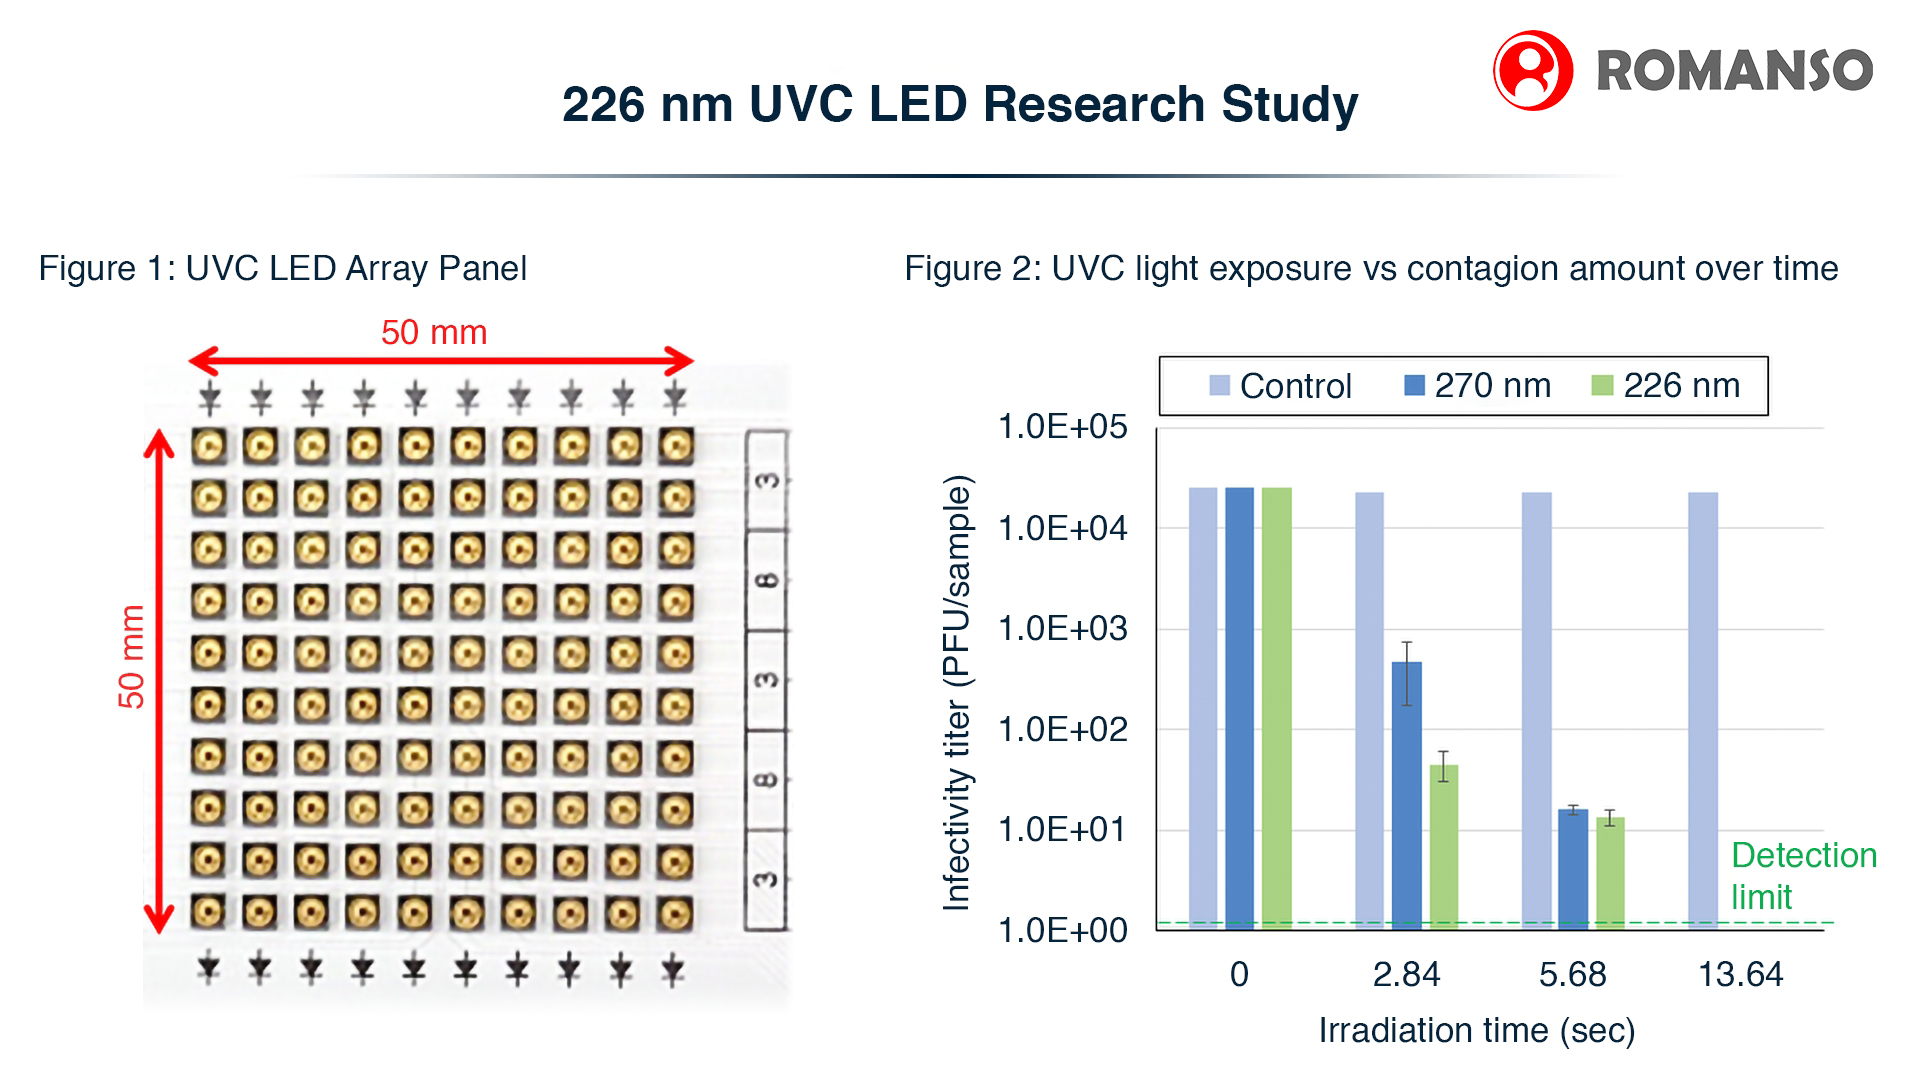 Studies Have Shown to Confirm 226 nm UVC LED Efficacy Against SARS-CoV-2 and Verify Reduced Effect on Animal Skin Cells